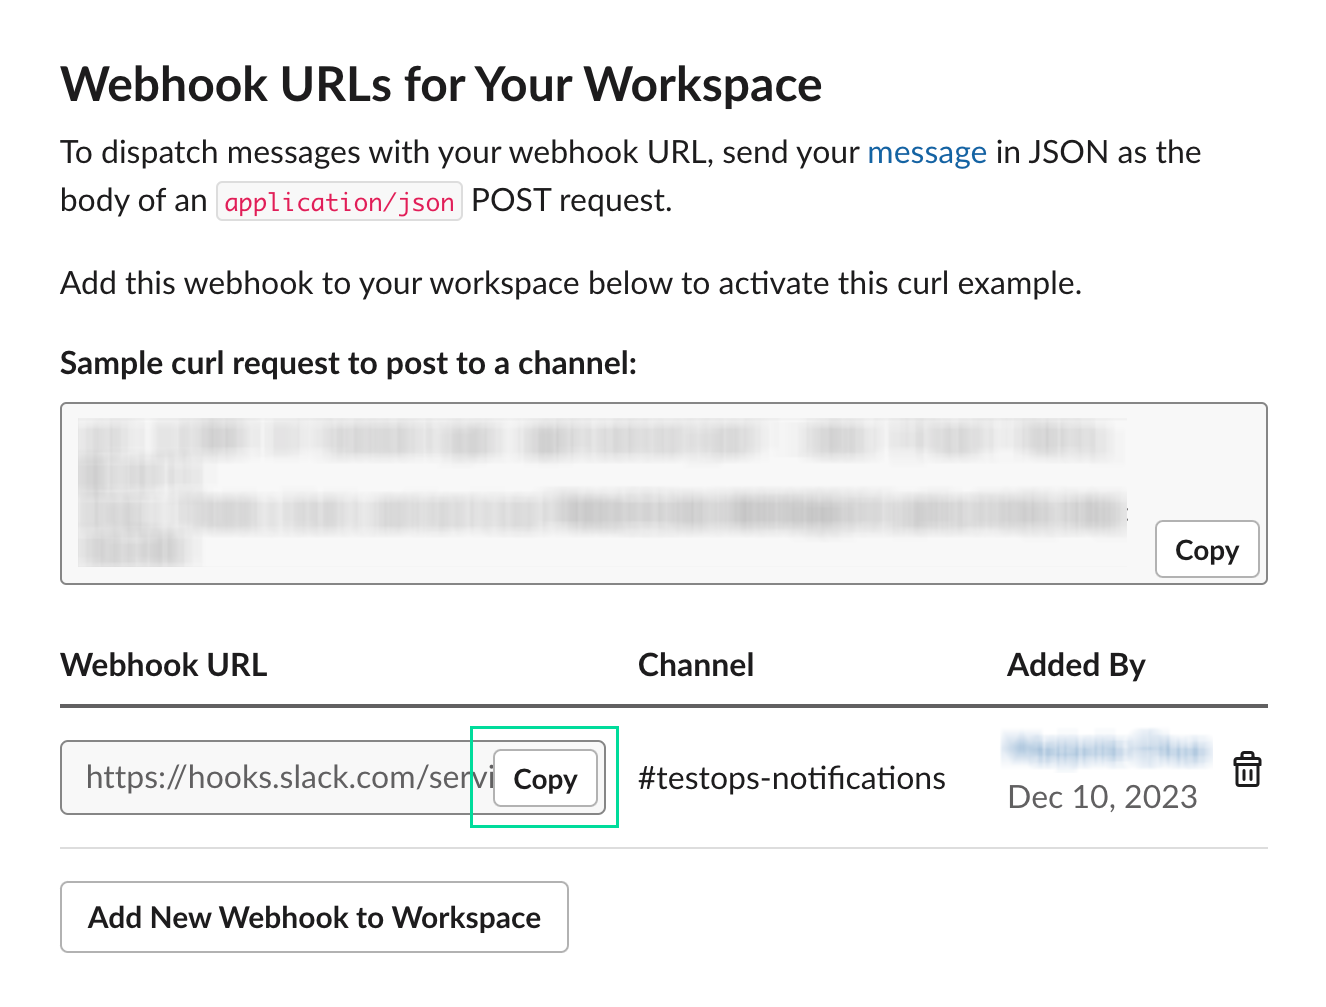 Copy the Webhook URL from settings.